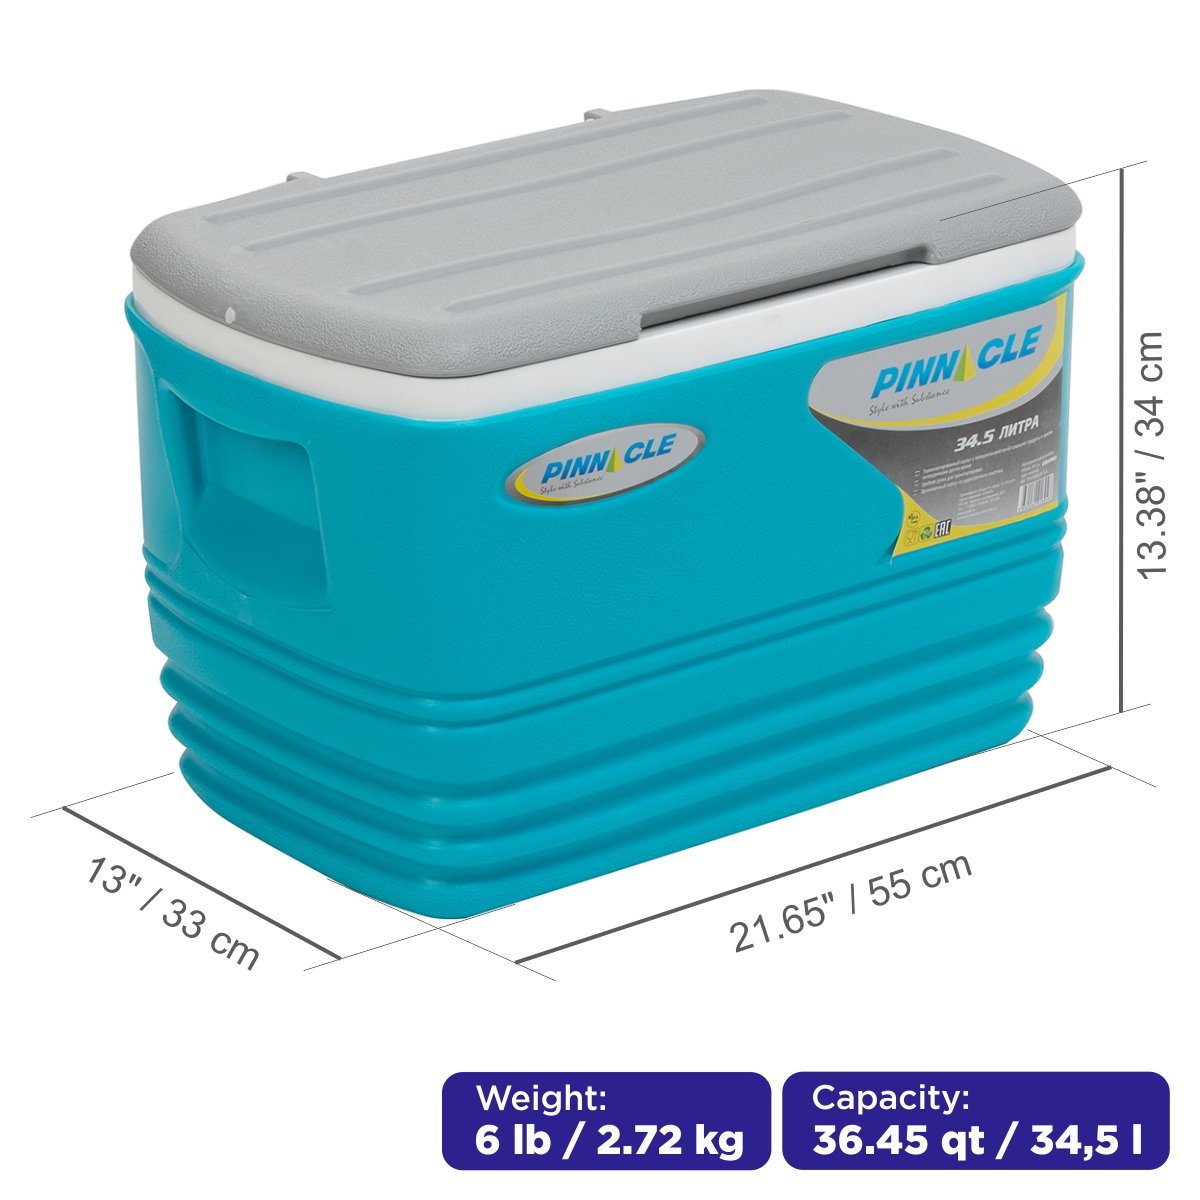 Eskimo Large Portable Camping Ice Chest, 36 qt is 21.7 inches long, 13.4 inches high and 13 inches wide, weighing 6 lbs